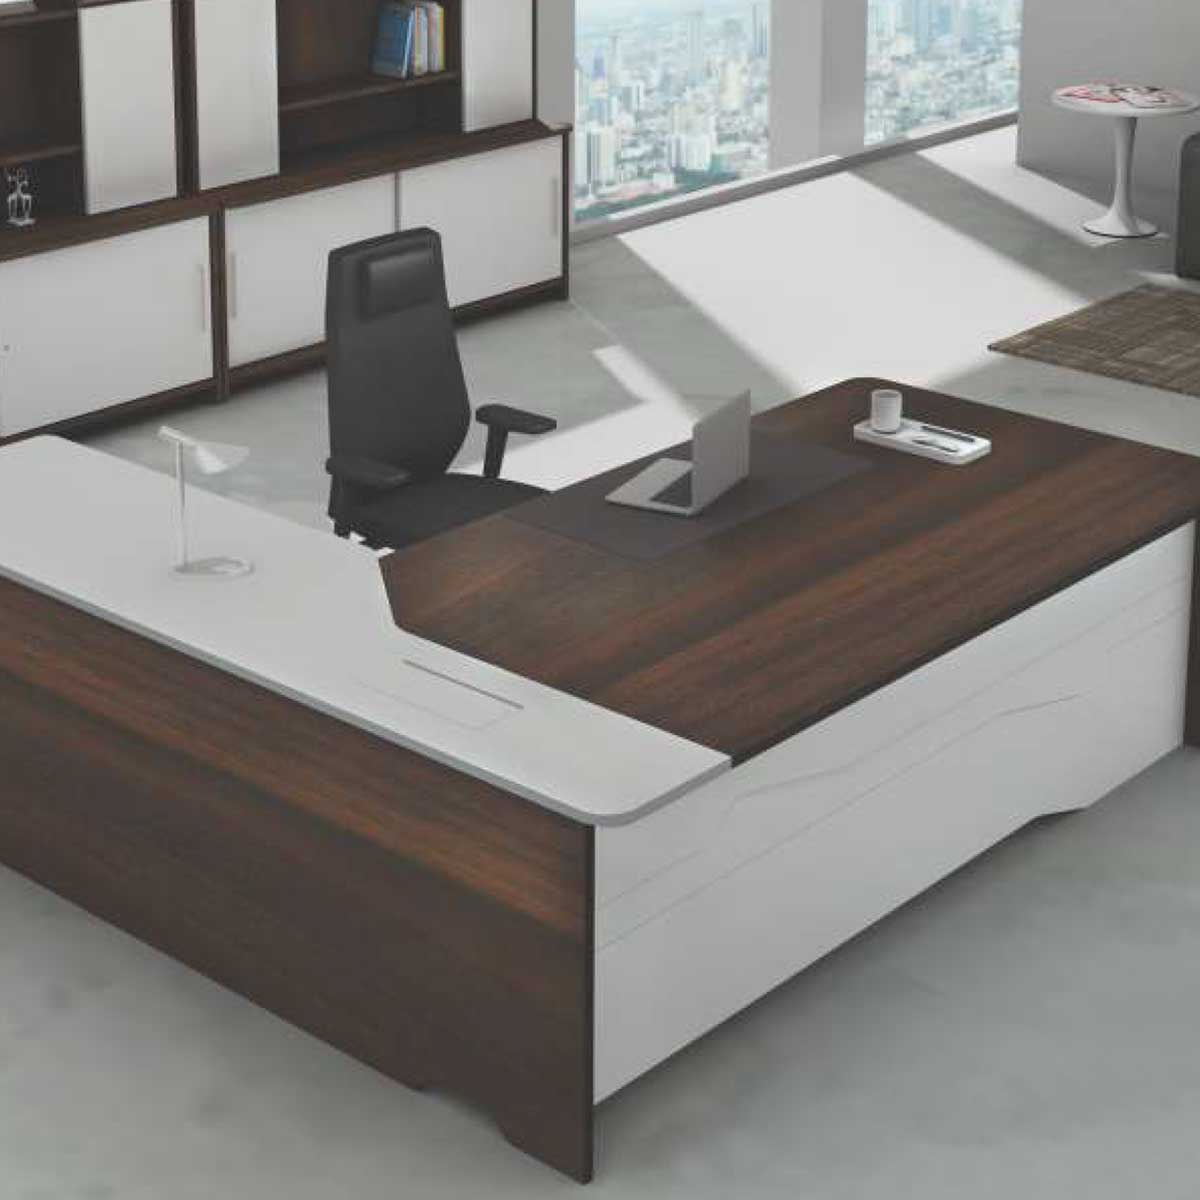 Manager Table Manufacturers, Suppliers in Rohini Sector 22